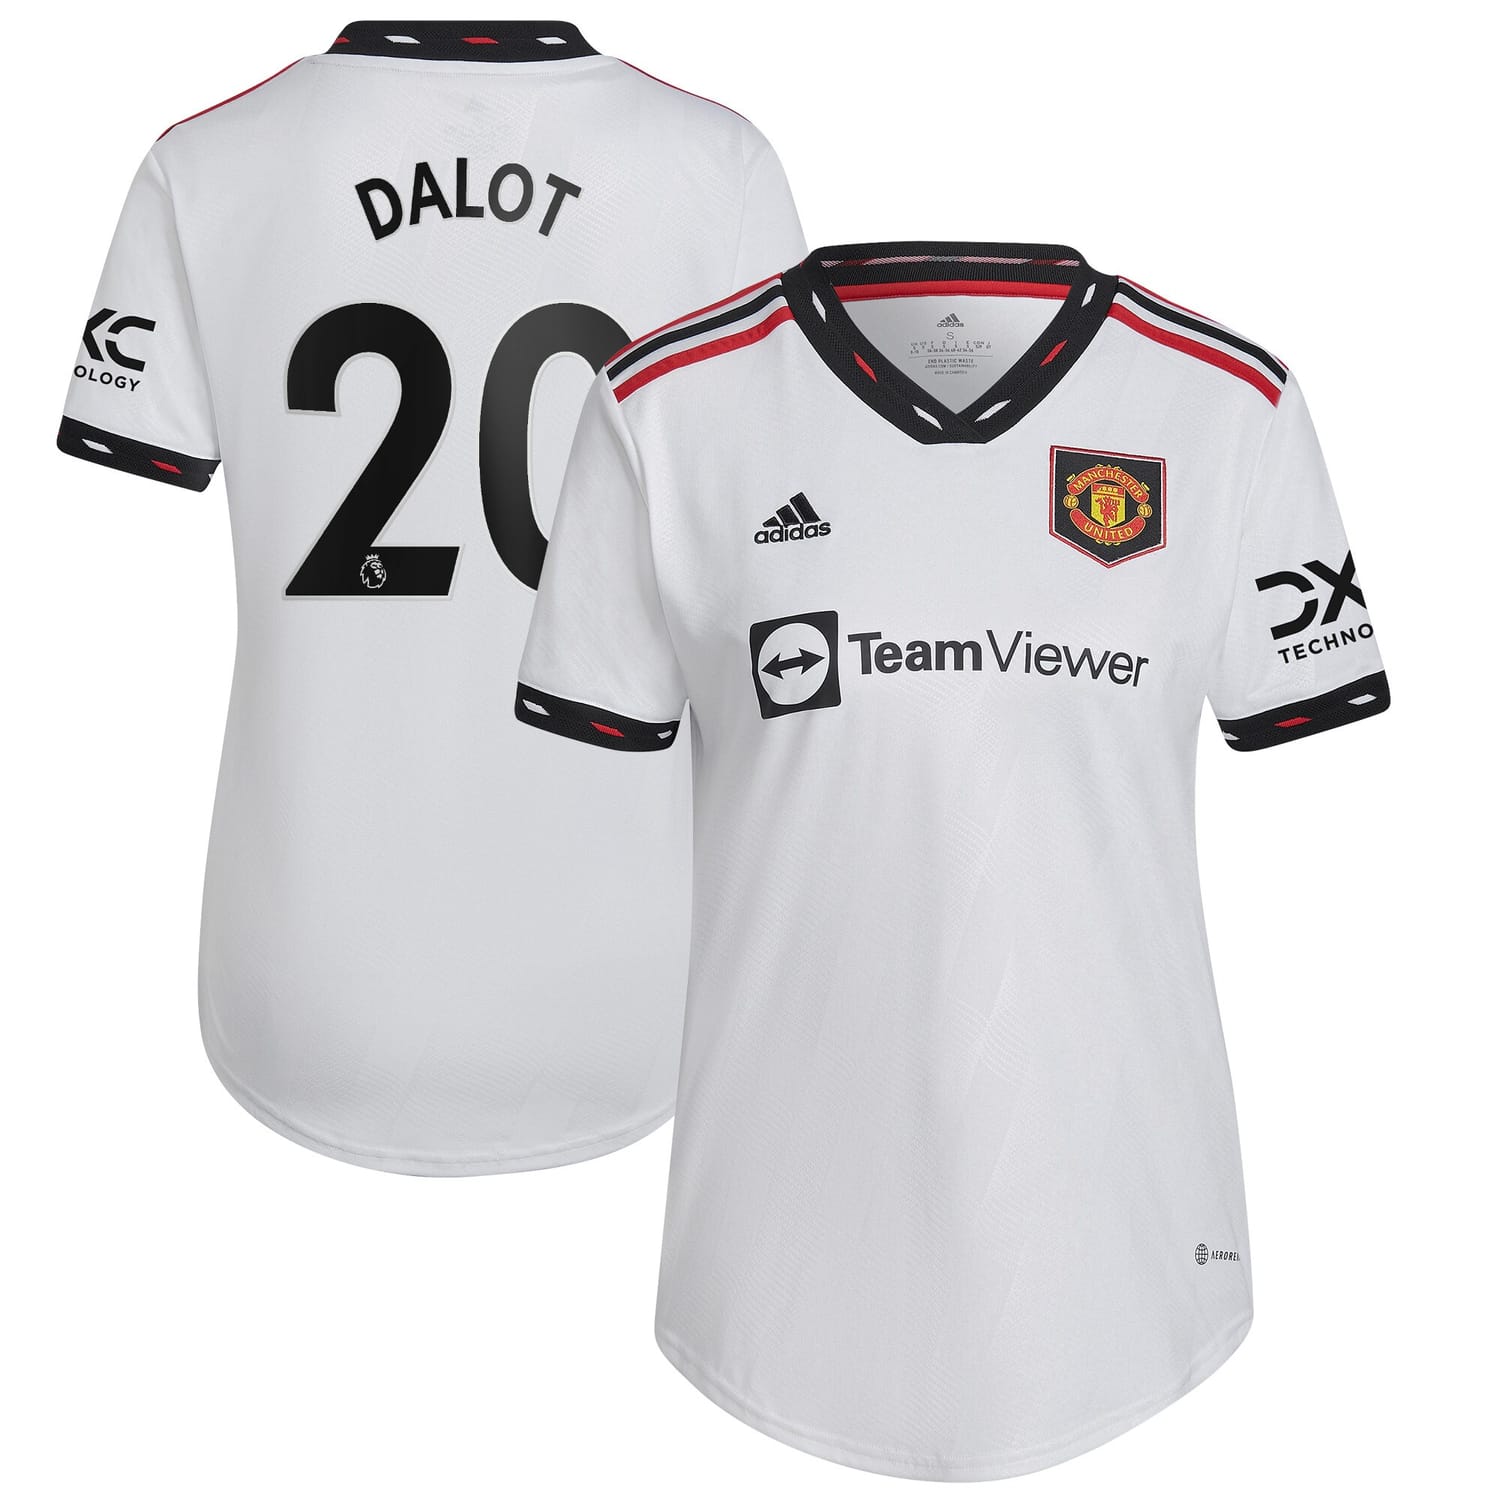 Premier League Manchester United Away Jersey Shirt White 2022-23 player Diogo Dalot printing for Women